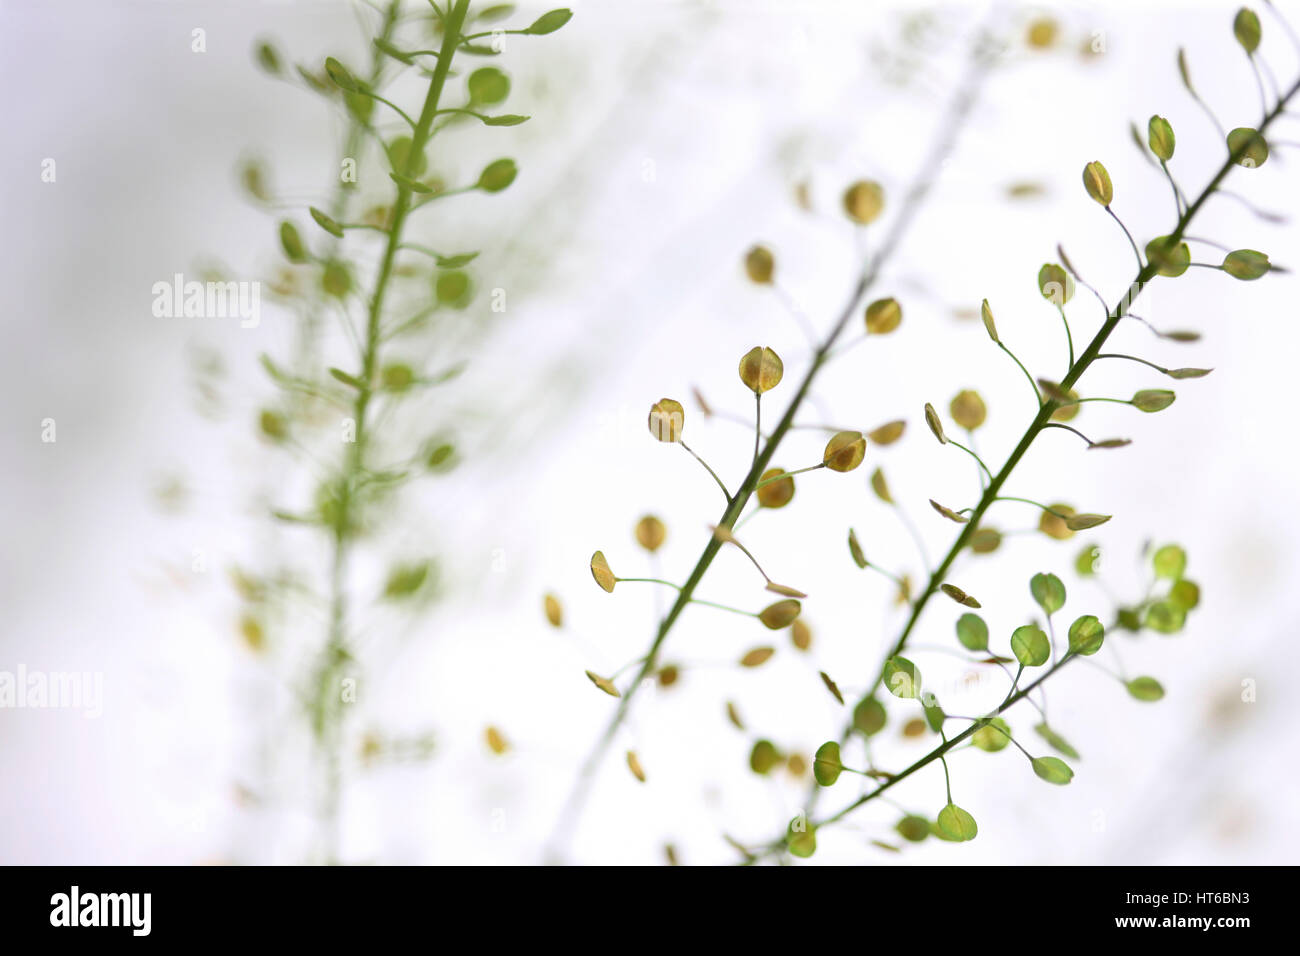 stems of thlaspi still life commonly known as field penny-cress Jane Ann Butler Photography  JABP1874 Stock Photo